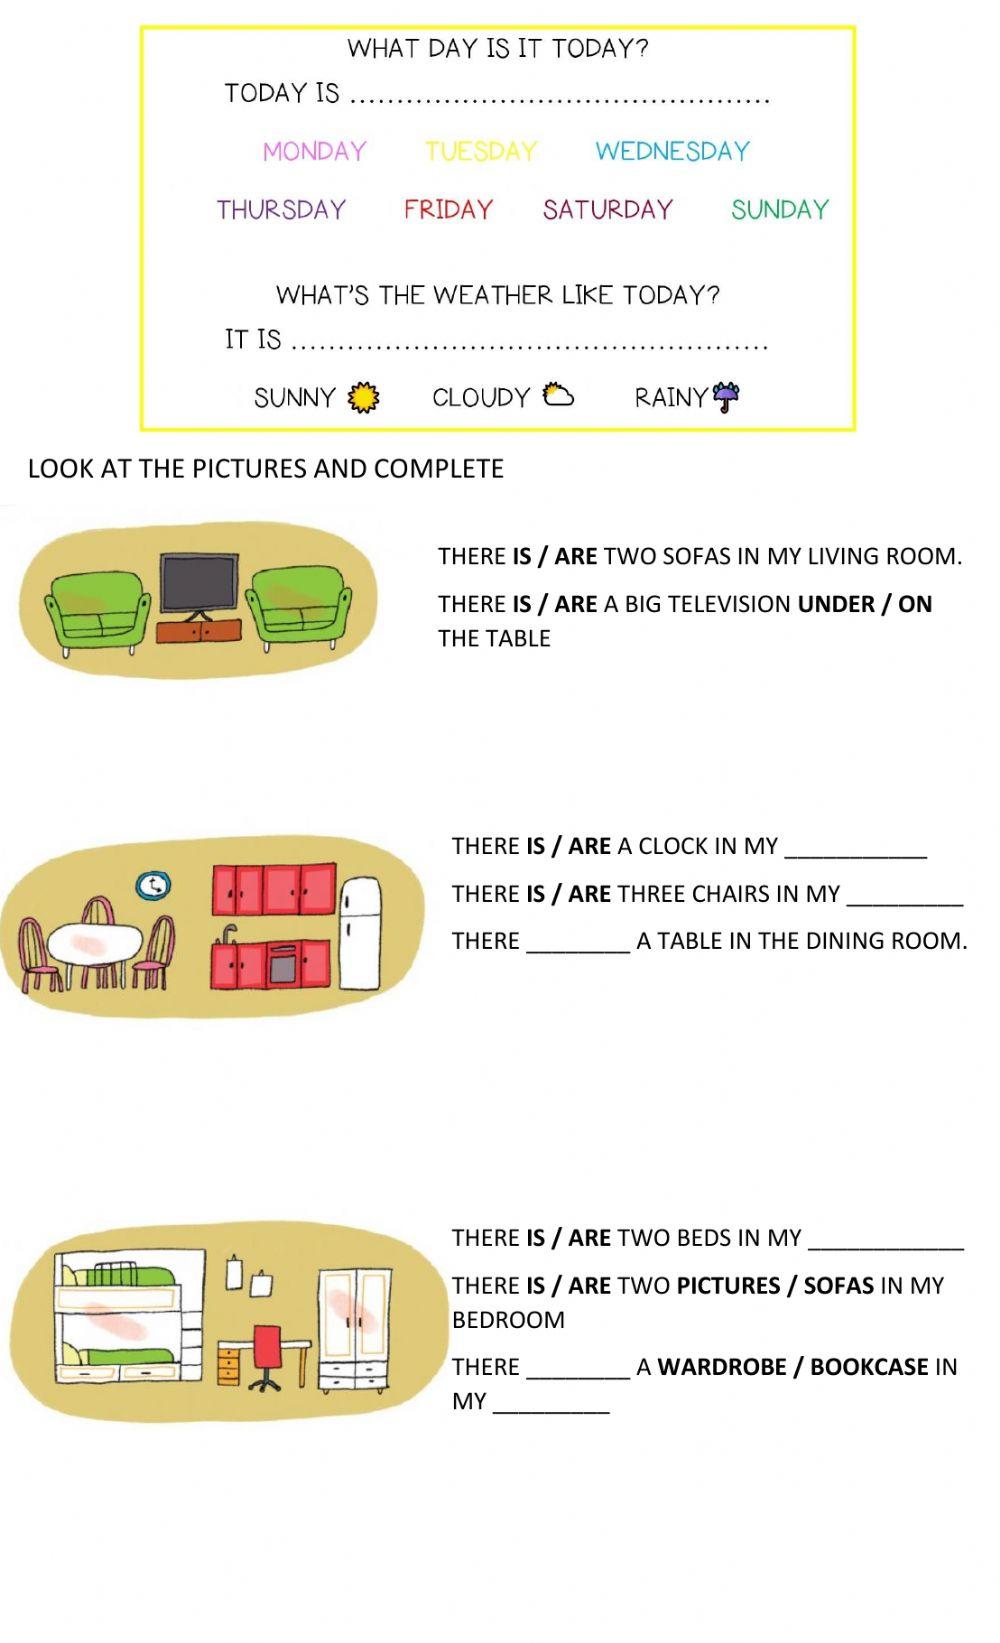 Preposition and there is there are